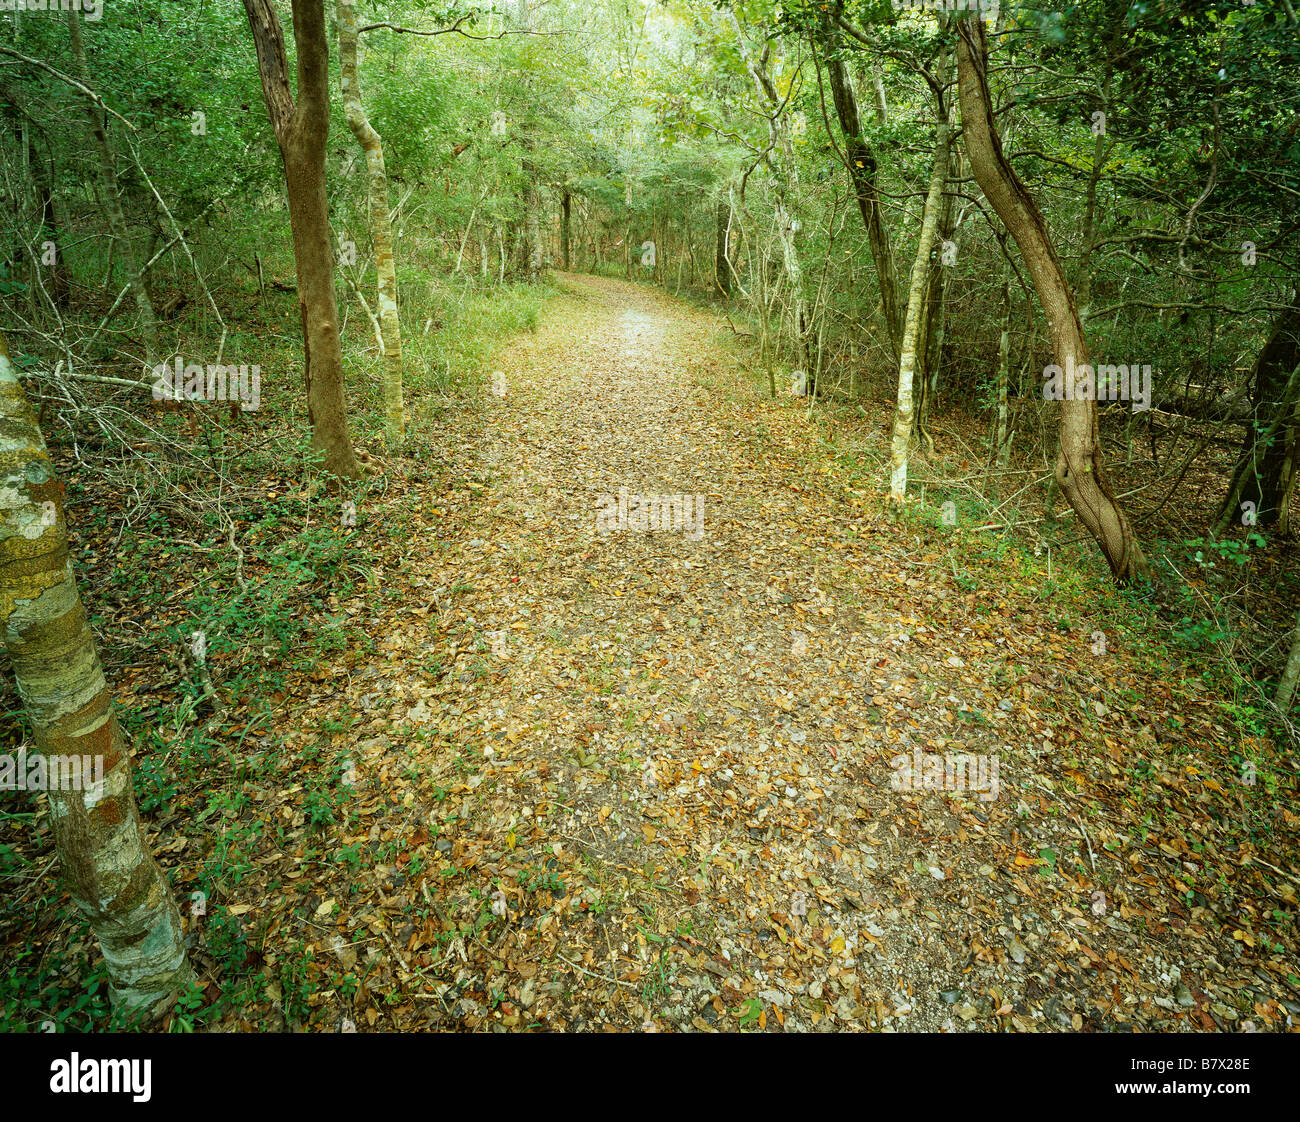 NORTH CAROLINA - Trail through the Buxton Woods in Cape Hatteras National Seashore on the Outer Banks Stock Photo